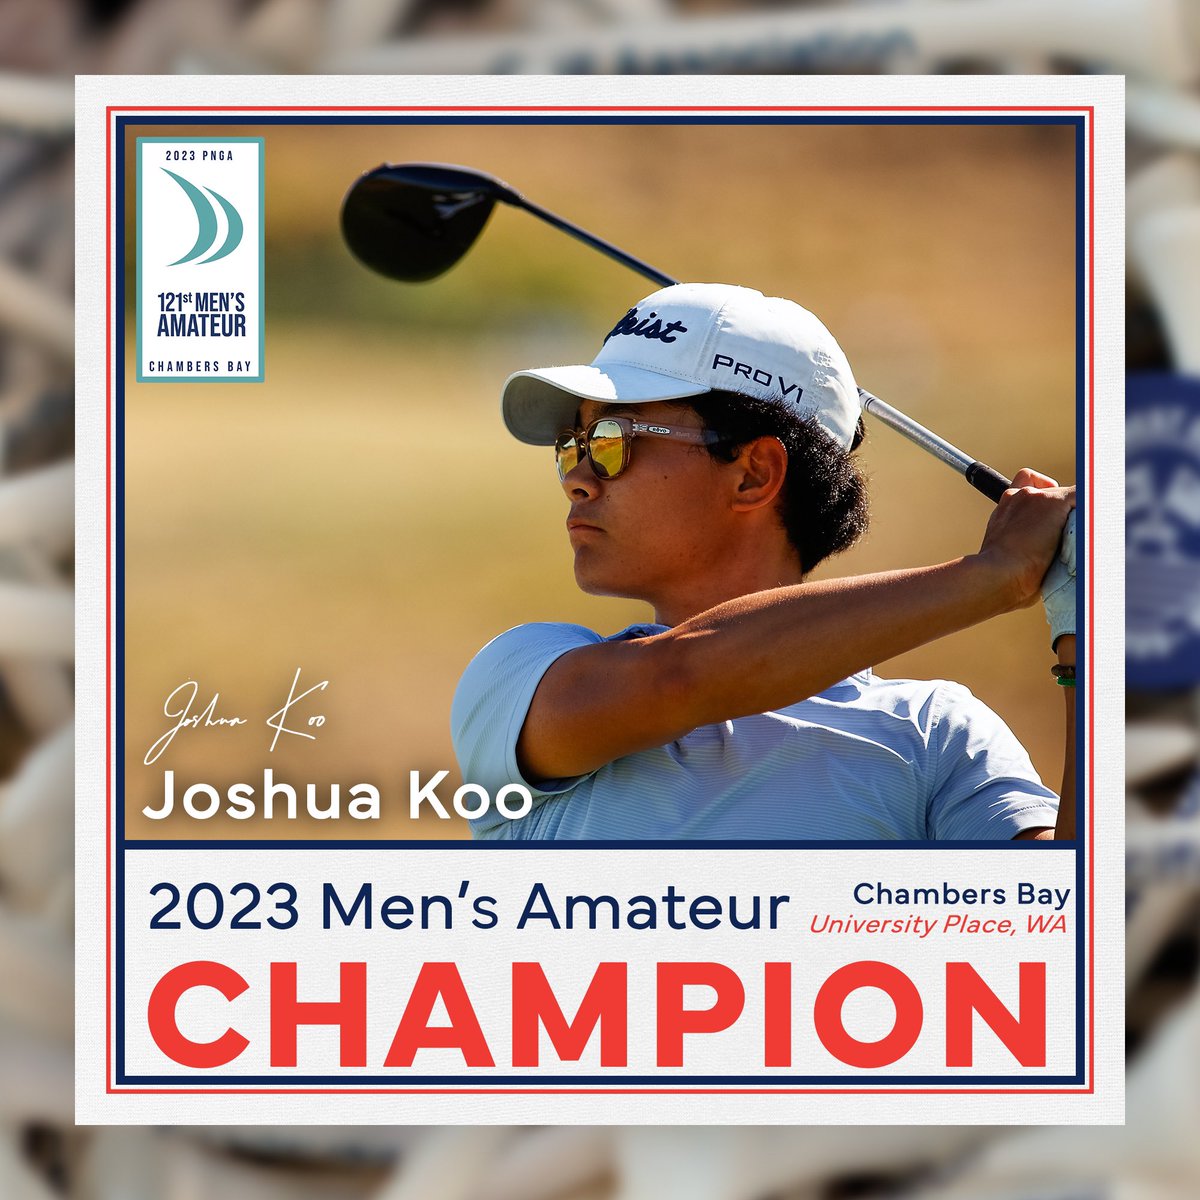 🏆👏 Please join us in congratulating, Joshua Koo of Cerritos, Calif., the winner of the 121st #PNGAMensAm Championship. Koo defeated Ben Borgida of Shoreline, Wash. 1 up in today's 36-hole final match to take home the trophy.